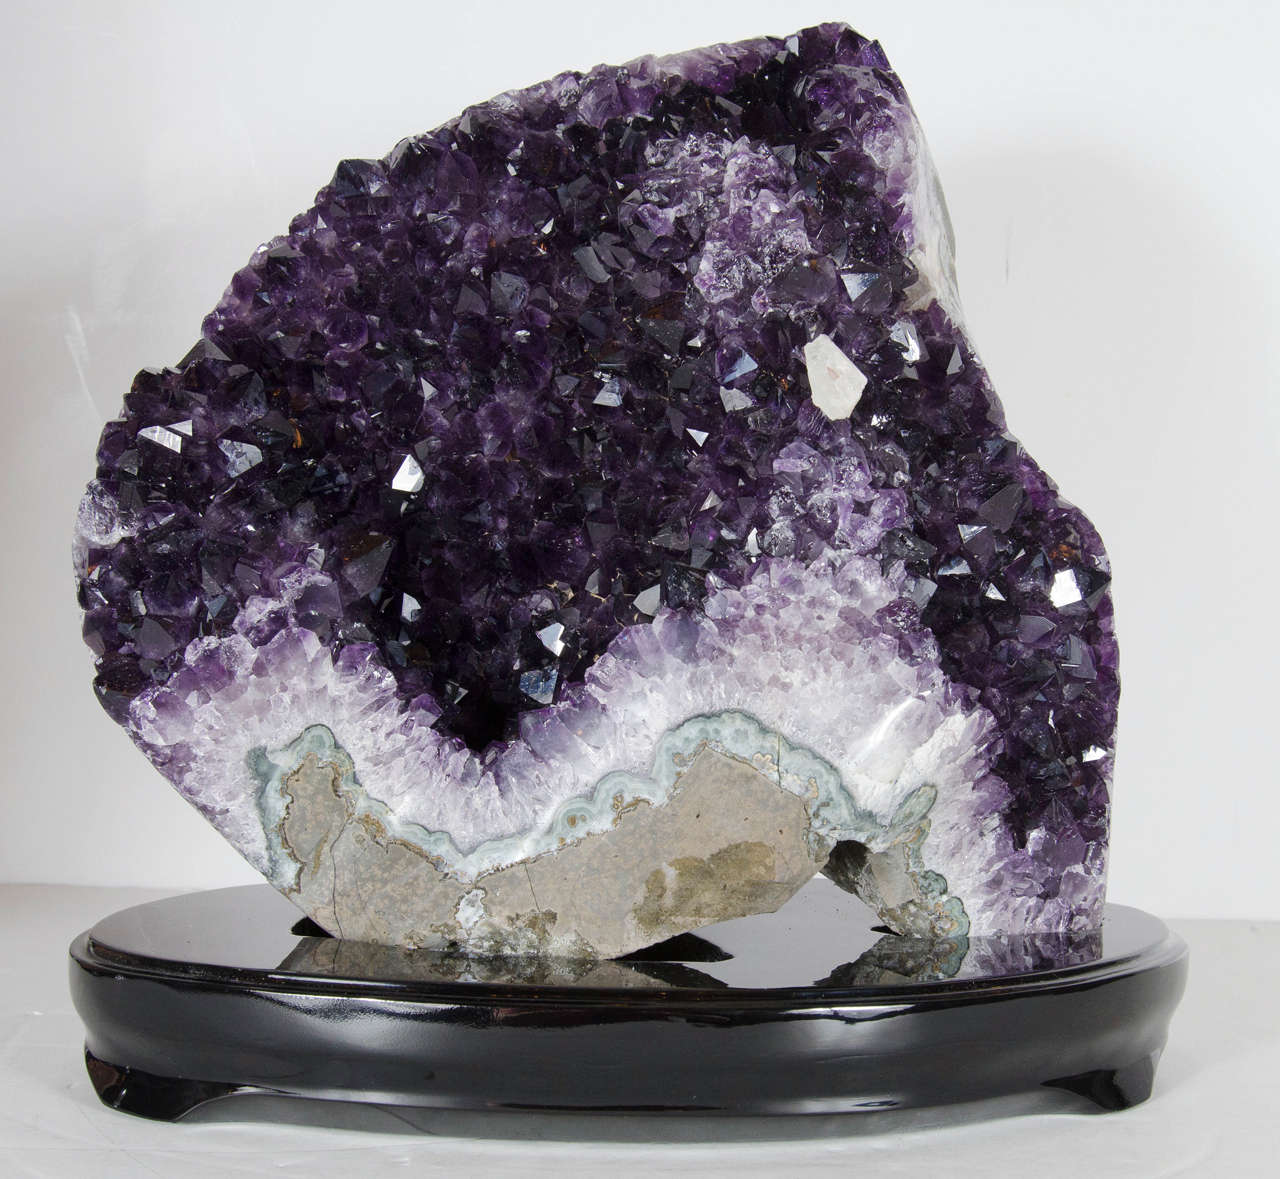 This unique rock crystal features a beautiful mixture of amethyst and clear quartz crystal. It's natural formation is intricate and is floating on a ebonized walnut base.